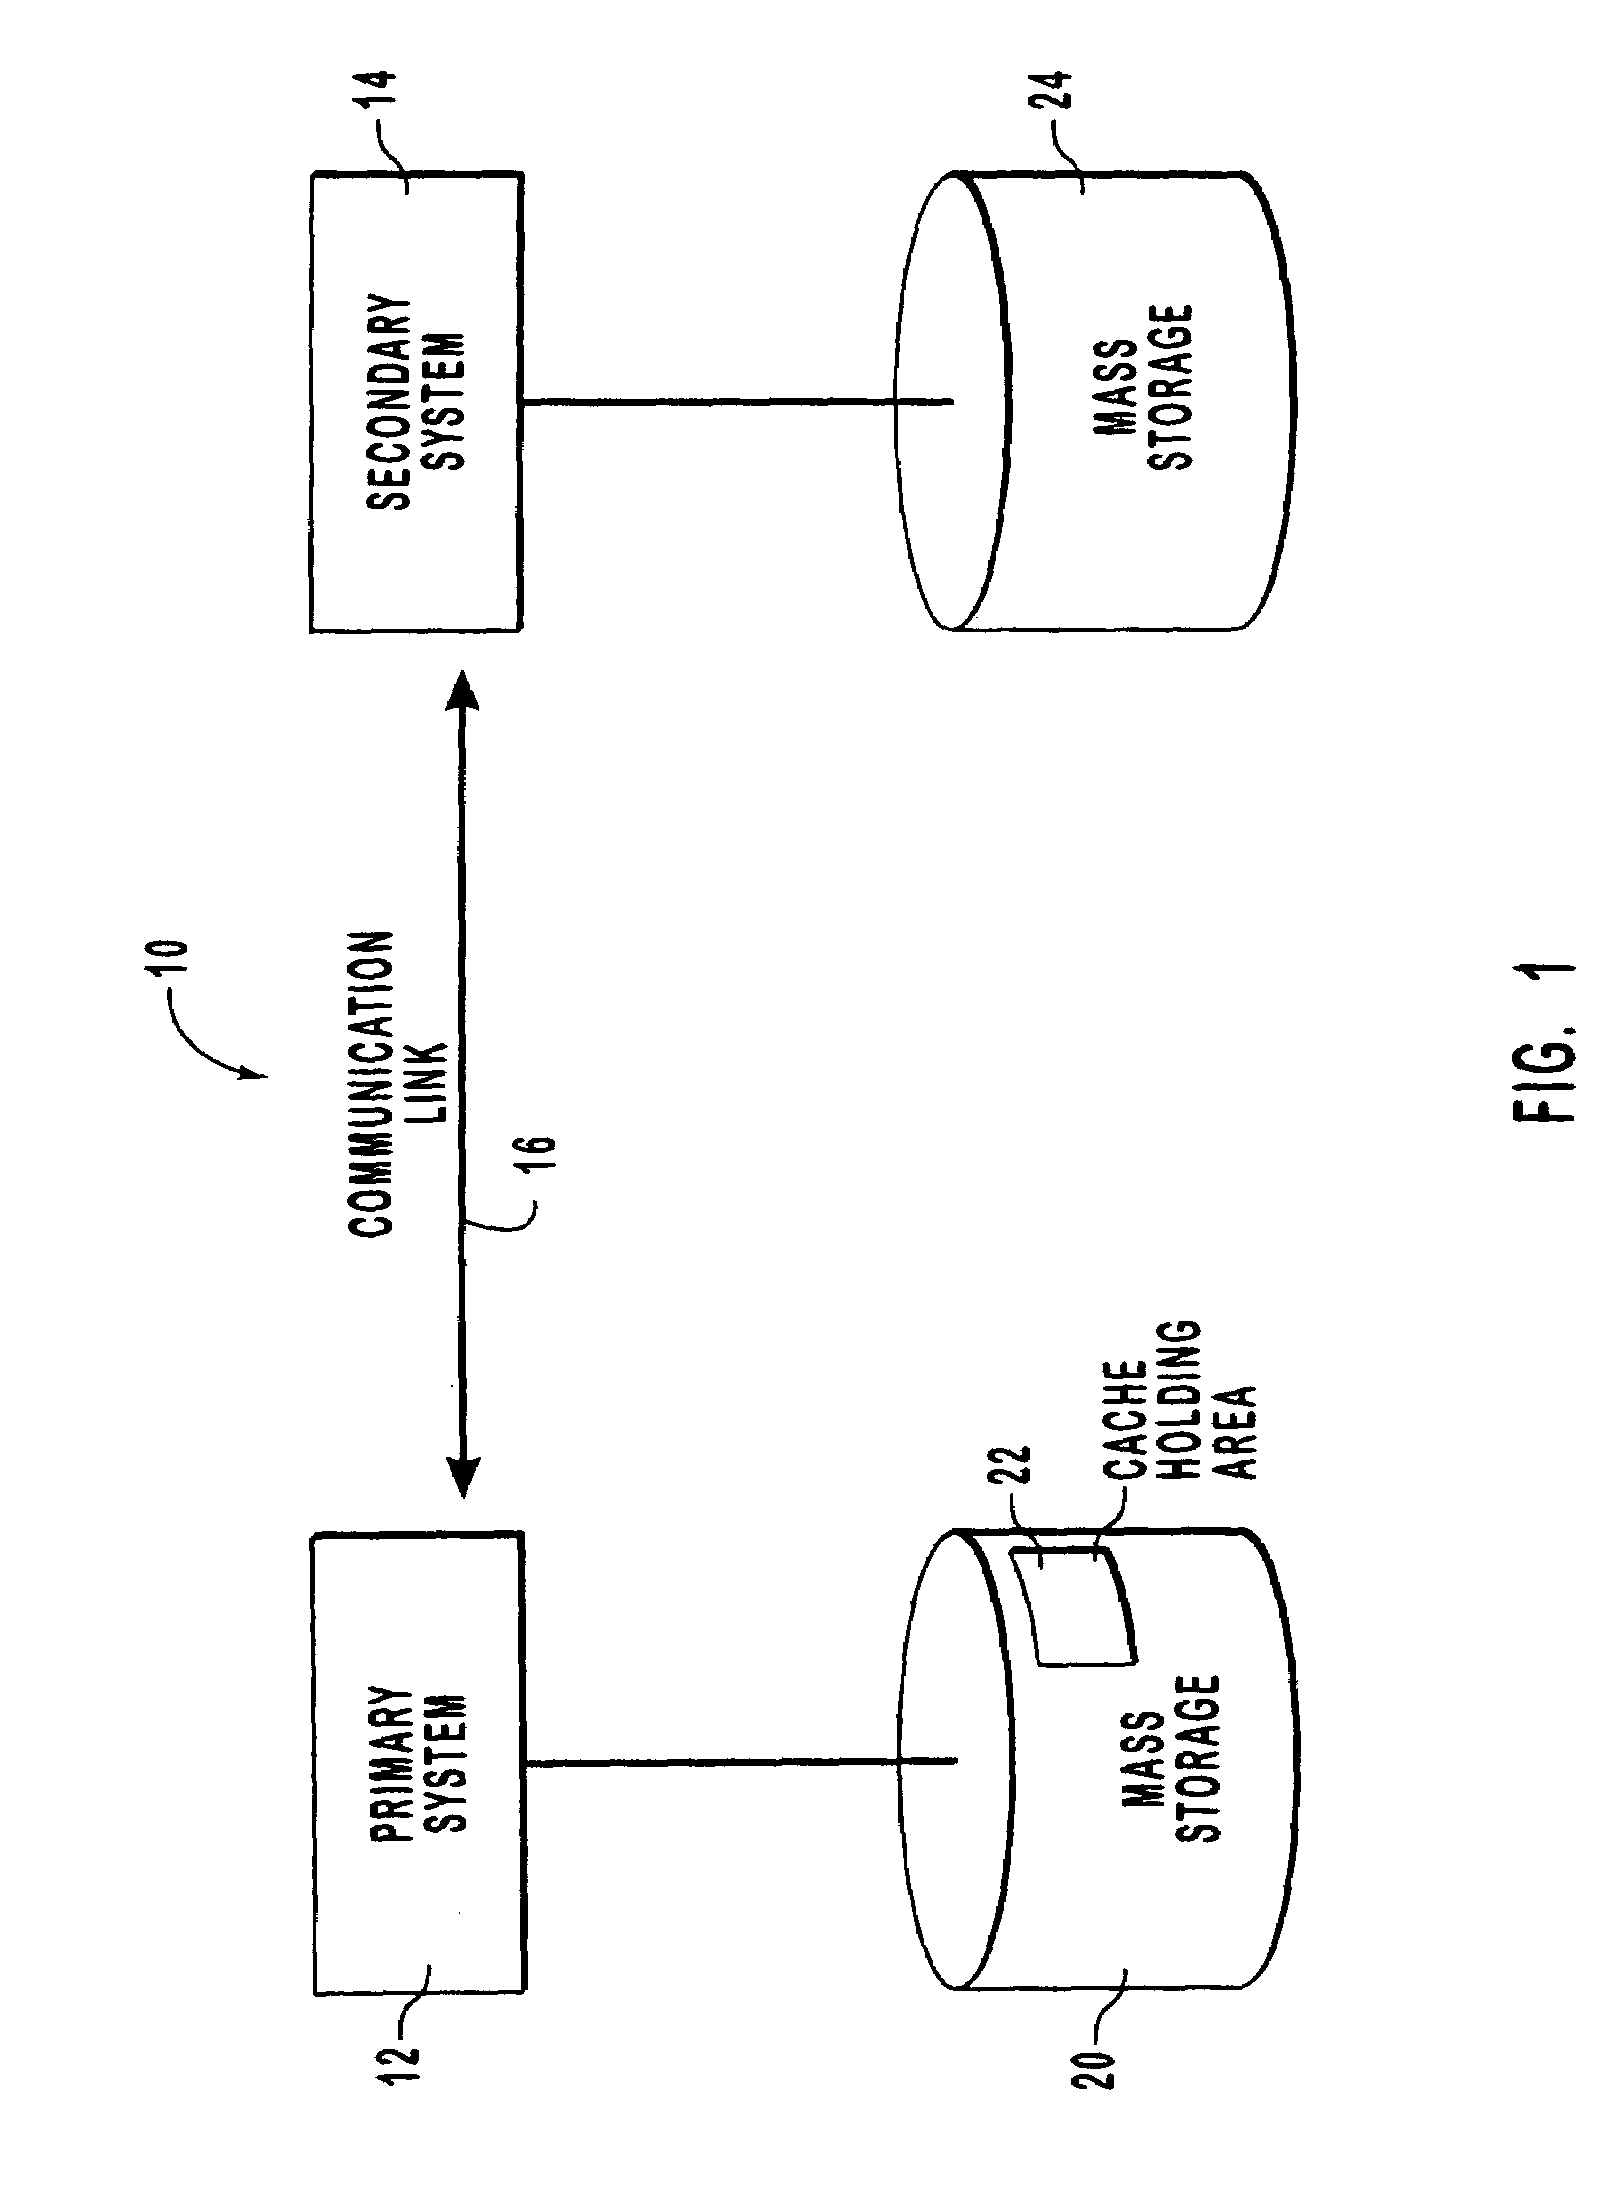 Method and system for mirroring and archiving mass storage